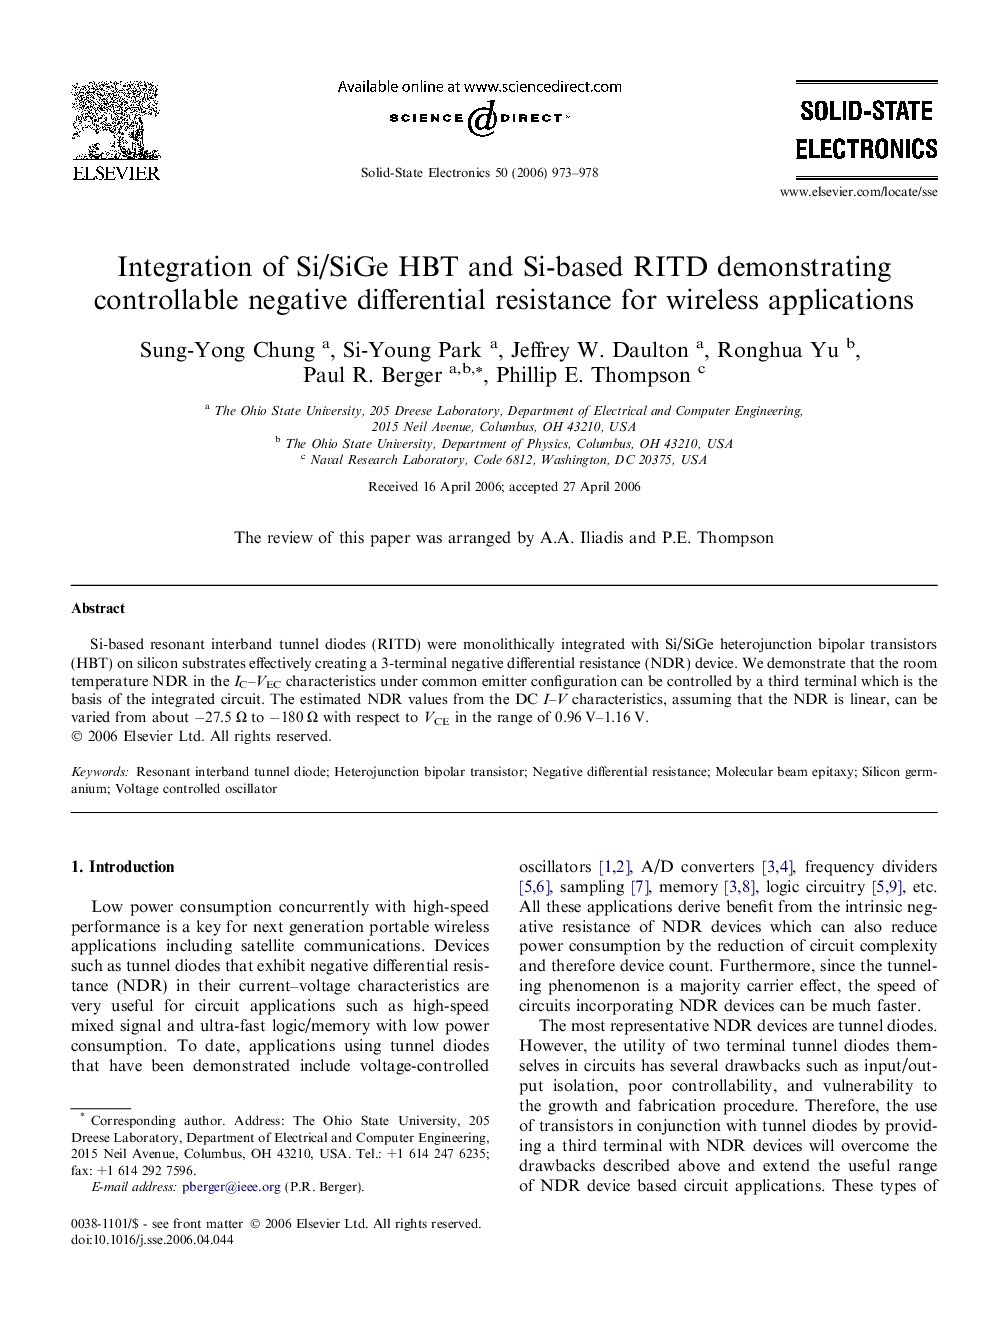 Integration of Si/SiGe HBT and Si-based RITD demonstrating controllable negative differential resistance for wireless applications